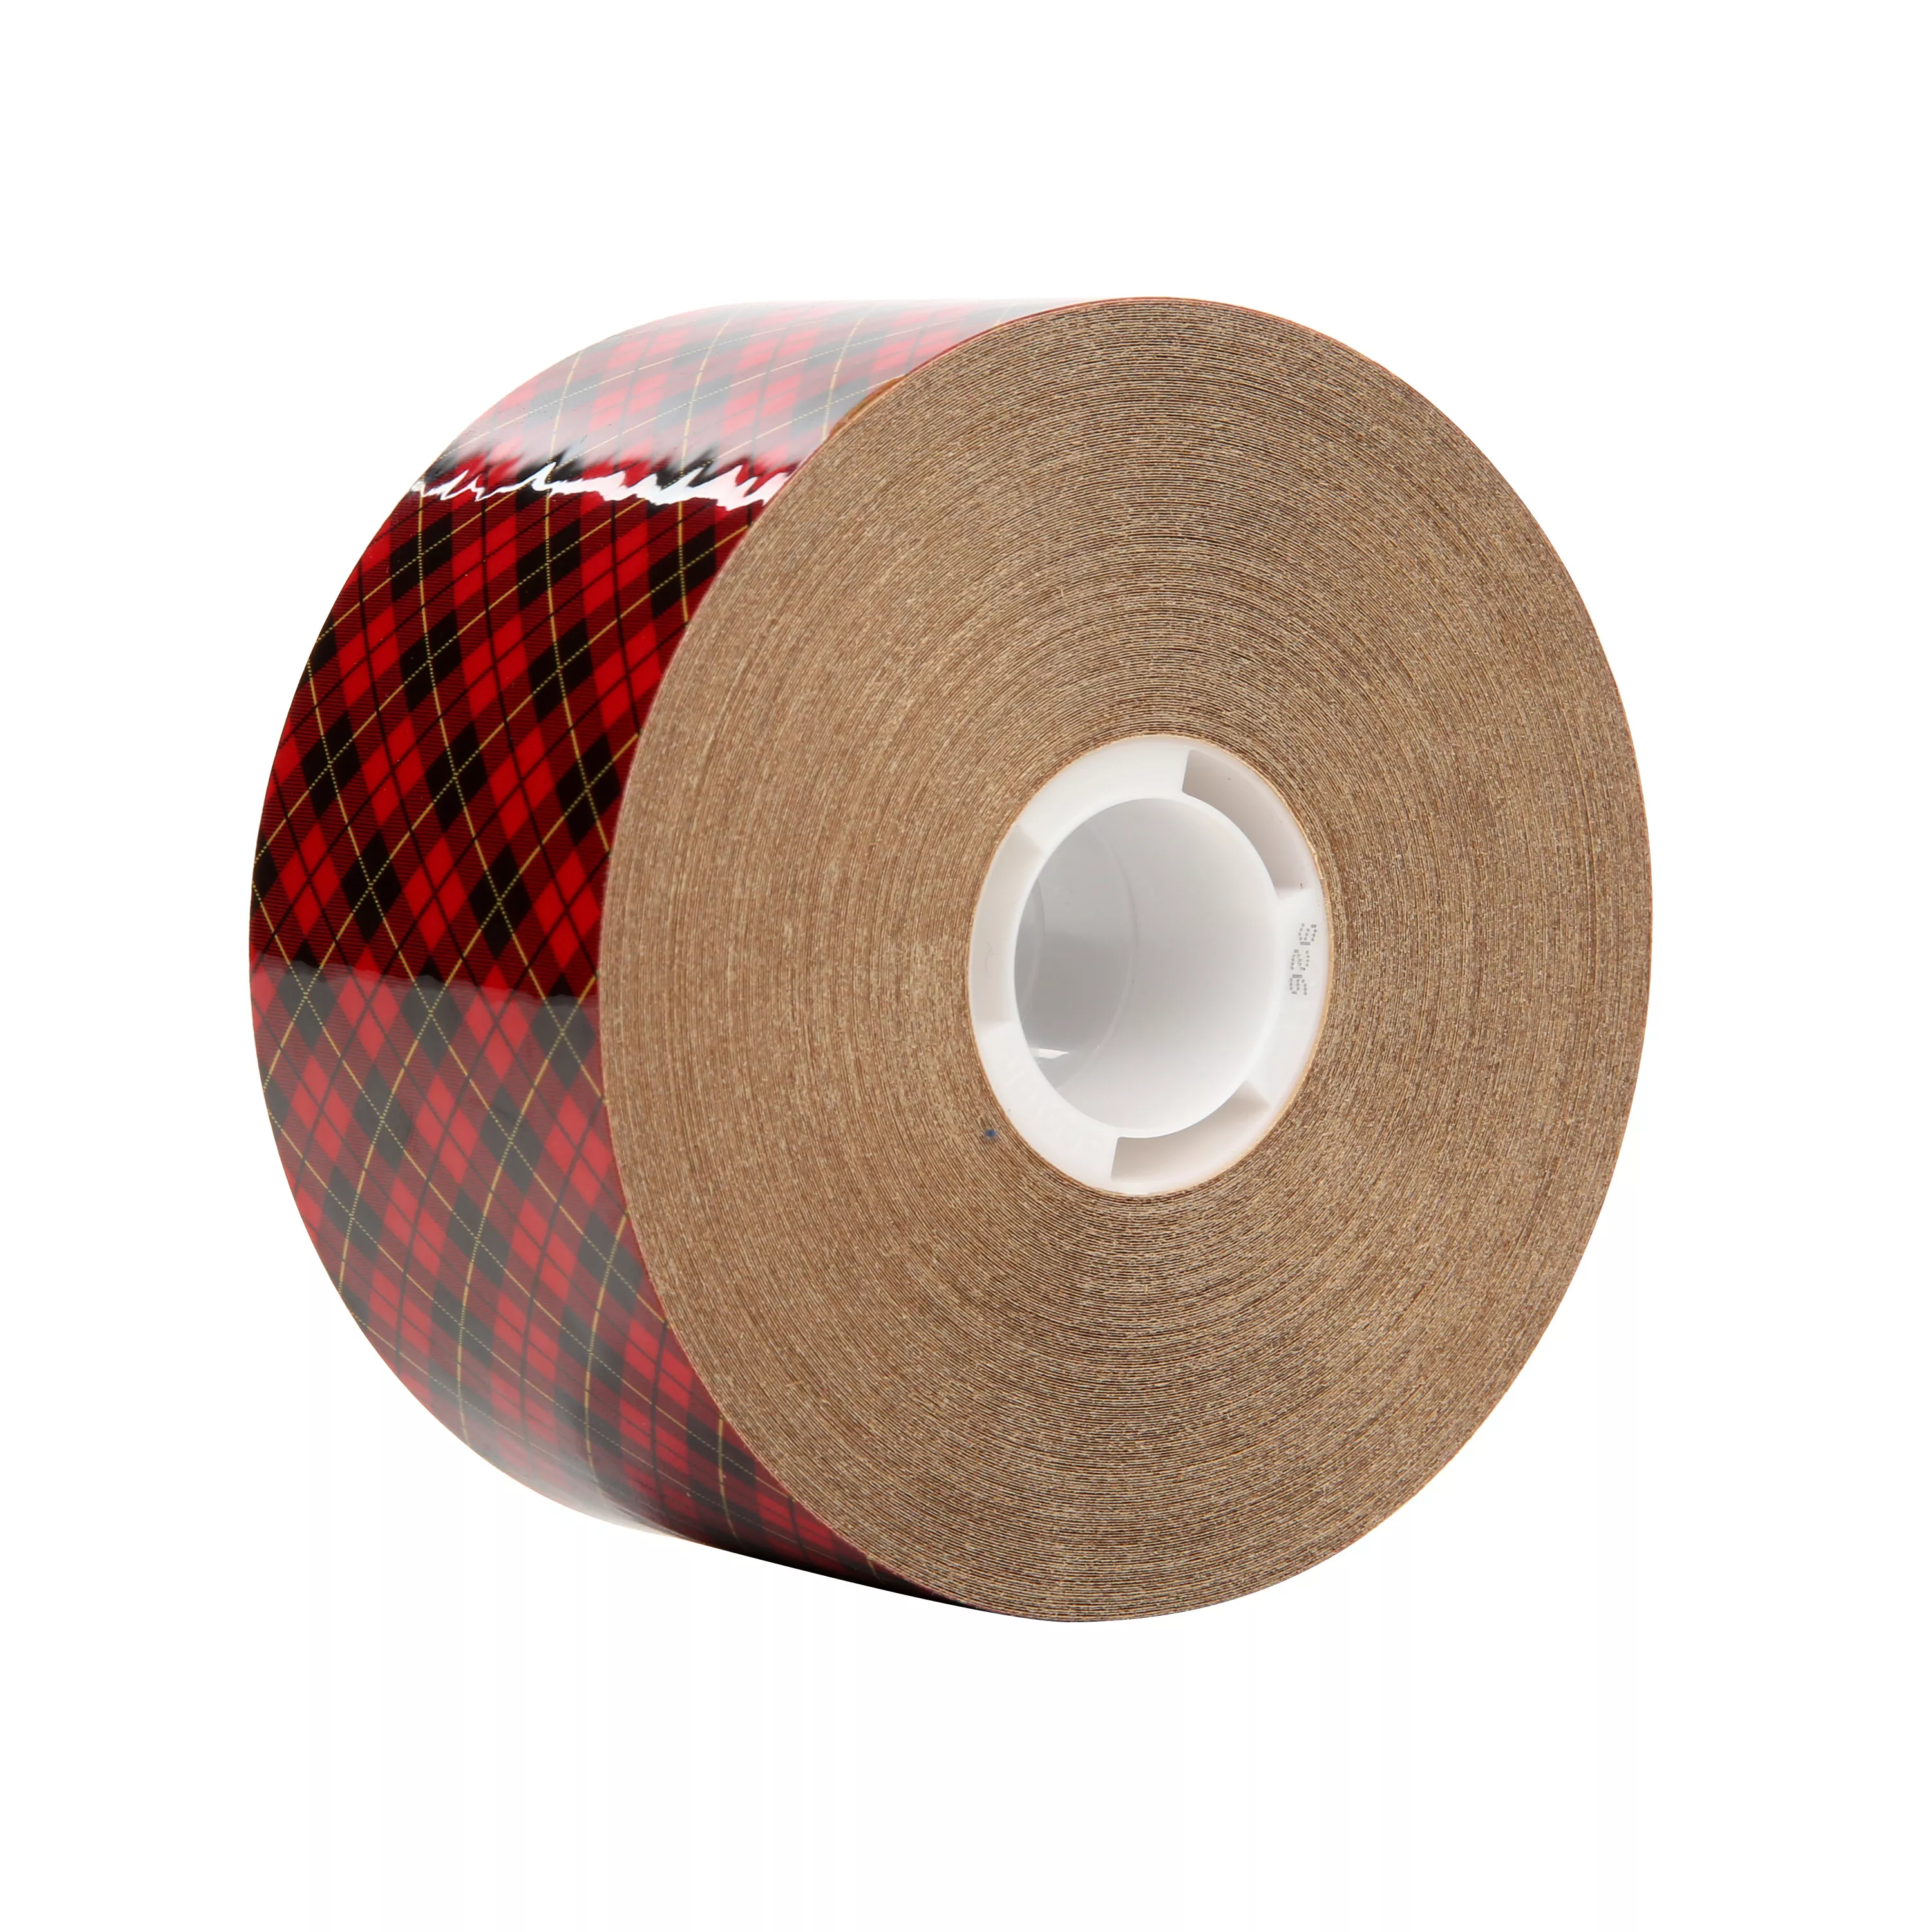 Scotch® ATG Adhesive Transfer Tape 926, Clear, 2 in x 36 yd, 5 mil, 24
Roll/Case